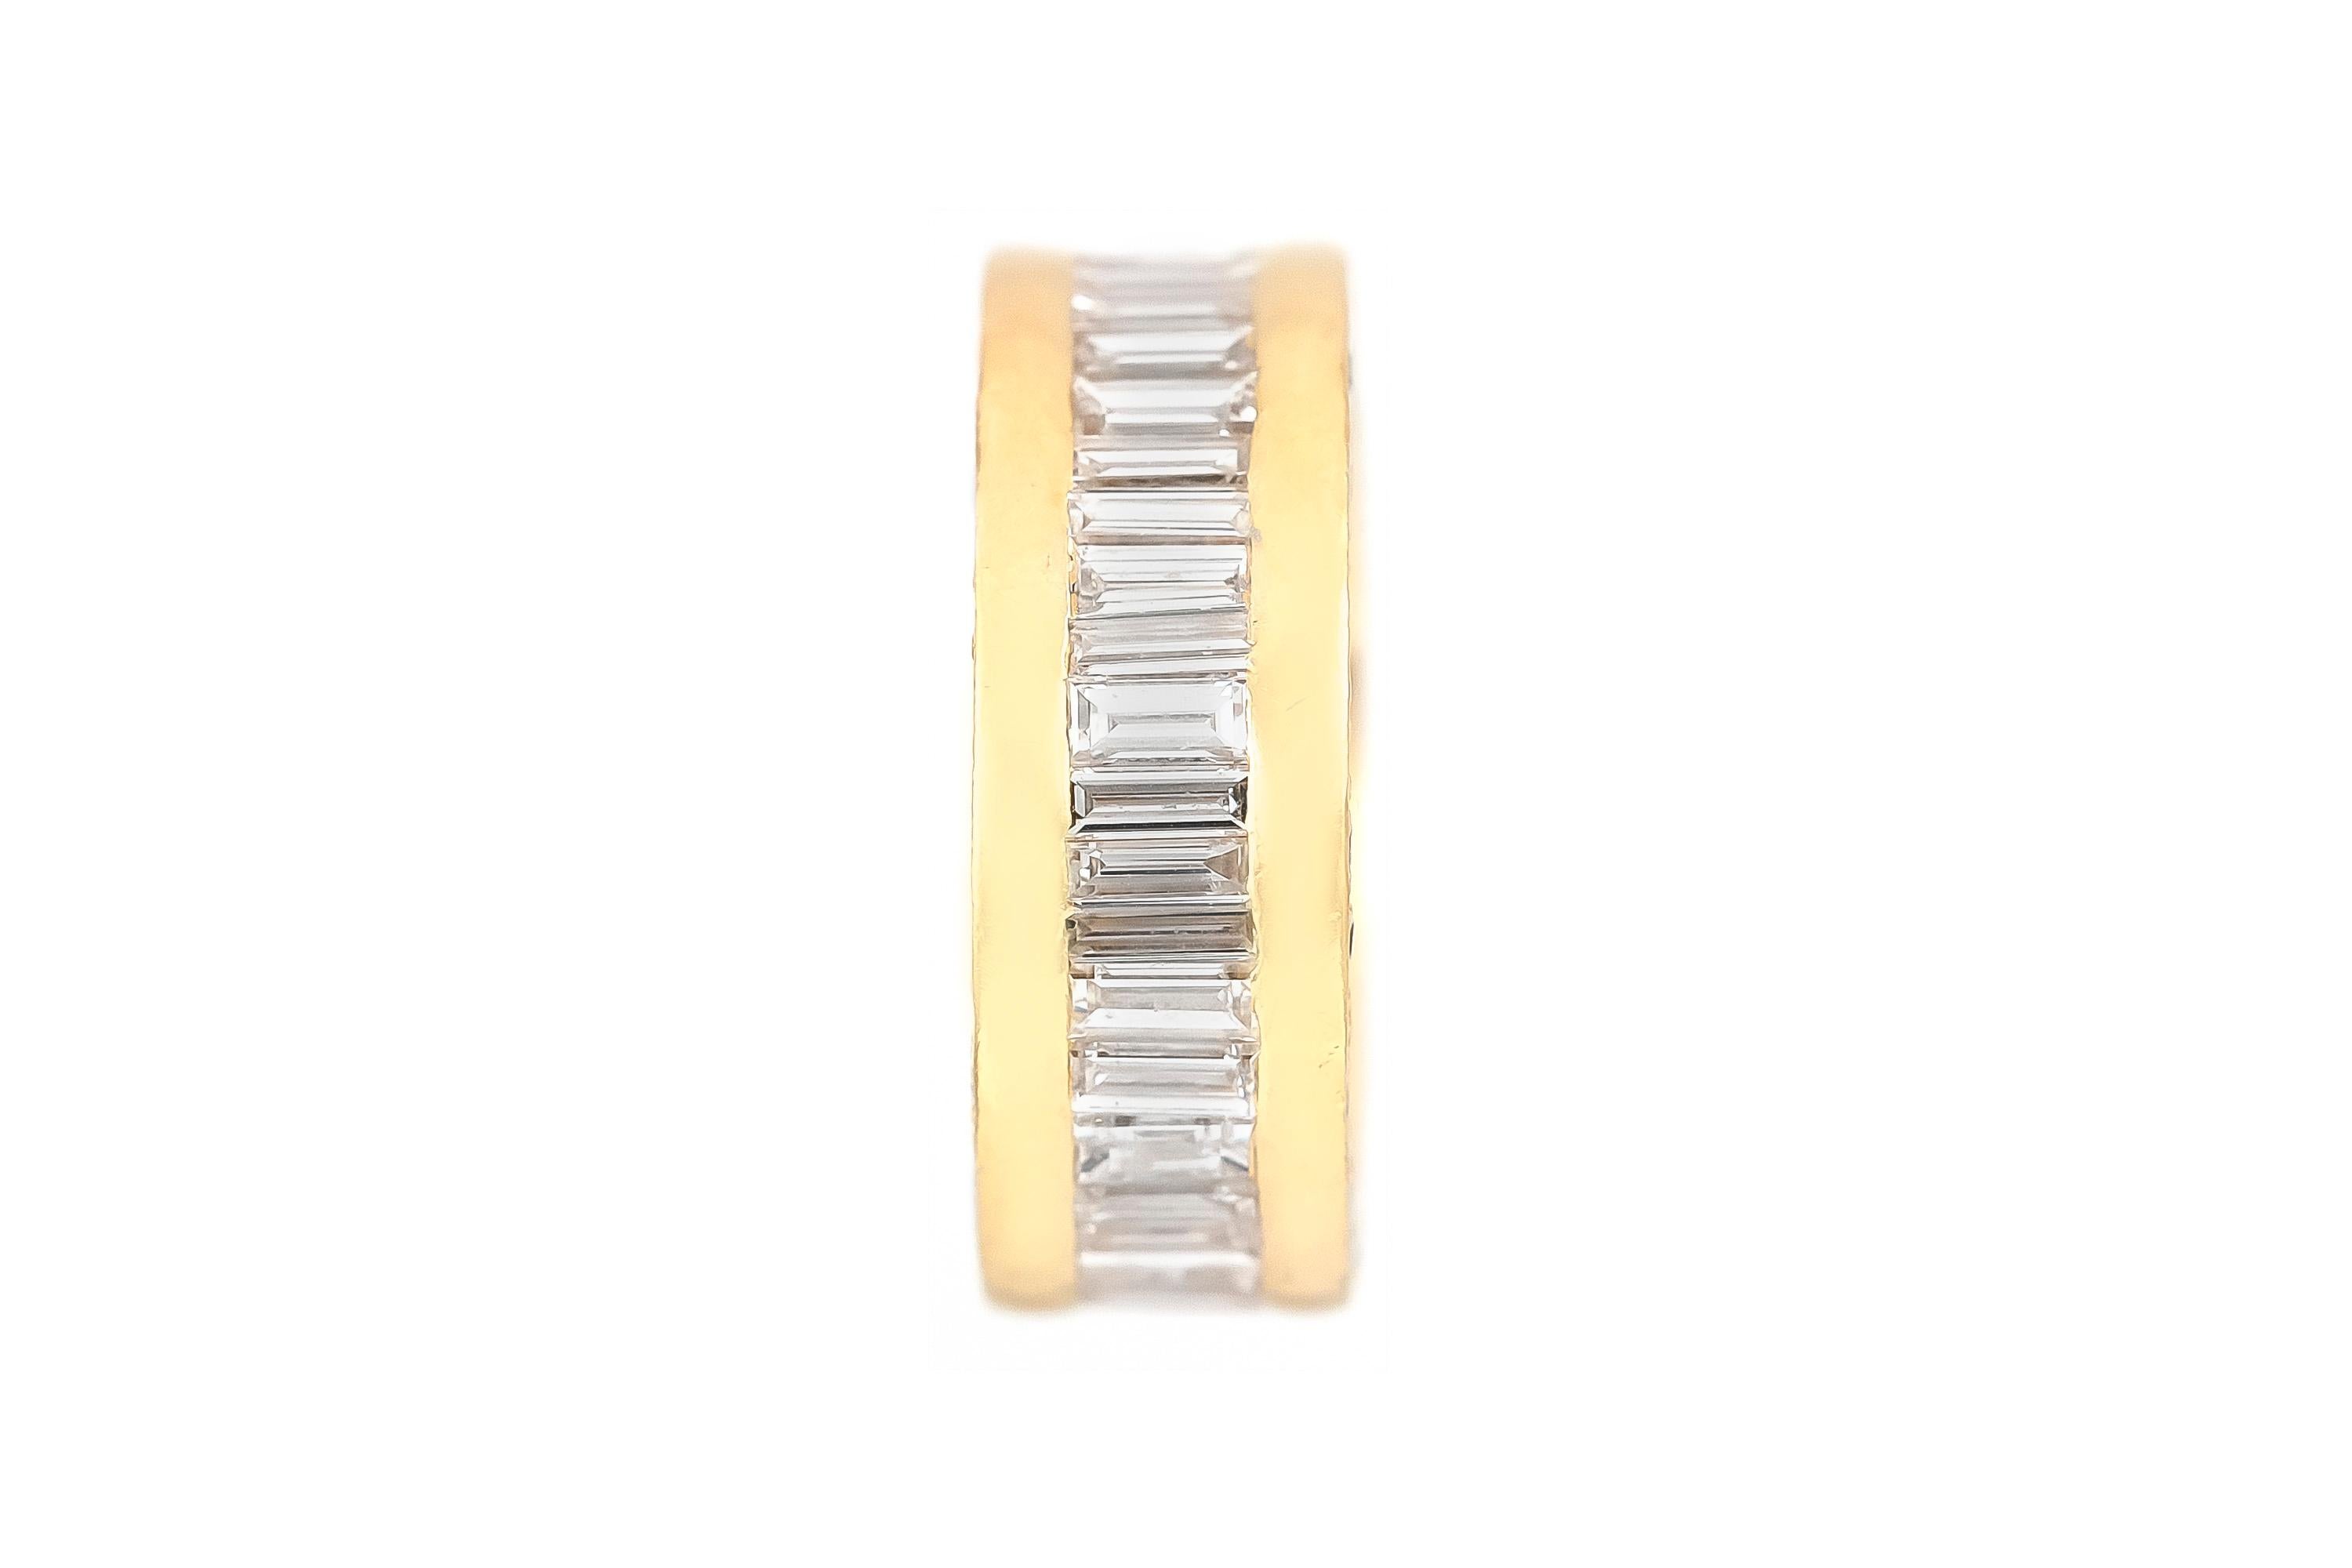 Finely crafted in 18k yellow gold with channel set Baguette cut diamonds weighing approximately a total of 14.35 carats.
H-I color, VS2-SI1 clarity
The band features Round Brilliant cut diamonds on the side, weighing approximately a total of 1.30